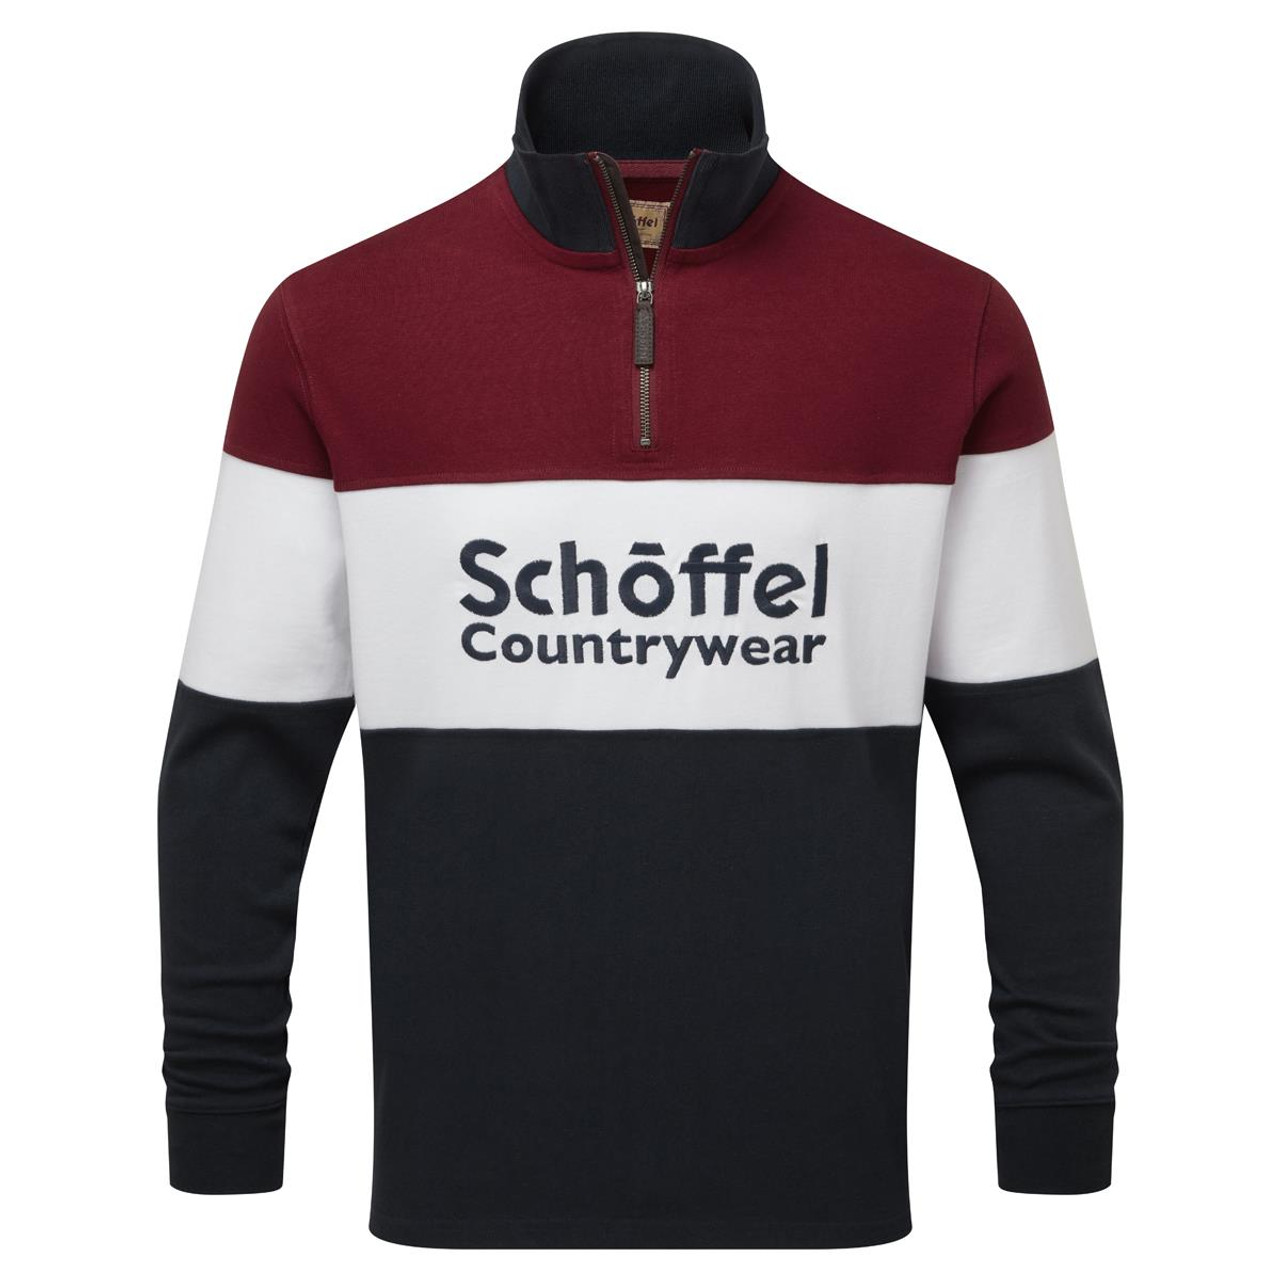 What changes occurred to the Schoffel Exeter since its launch?